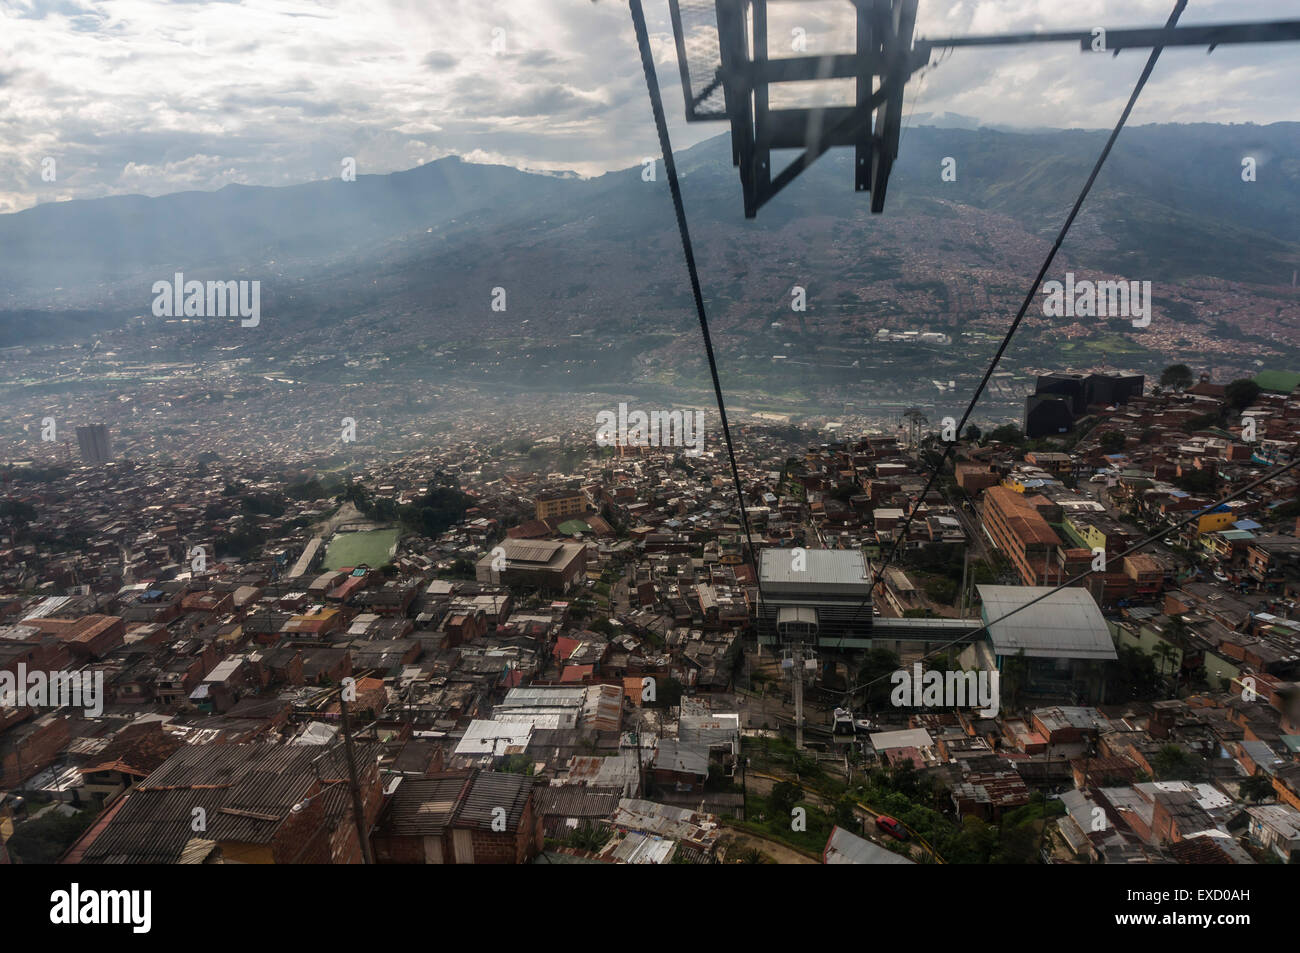 A view of the lower income neighborhoods  on the slopes above Medellin, Colombia from the Teleférico or air tram station. Stock Photo